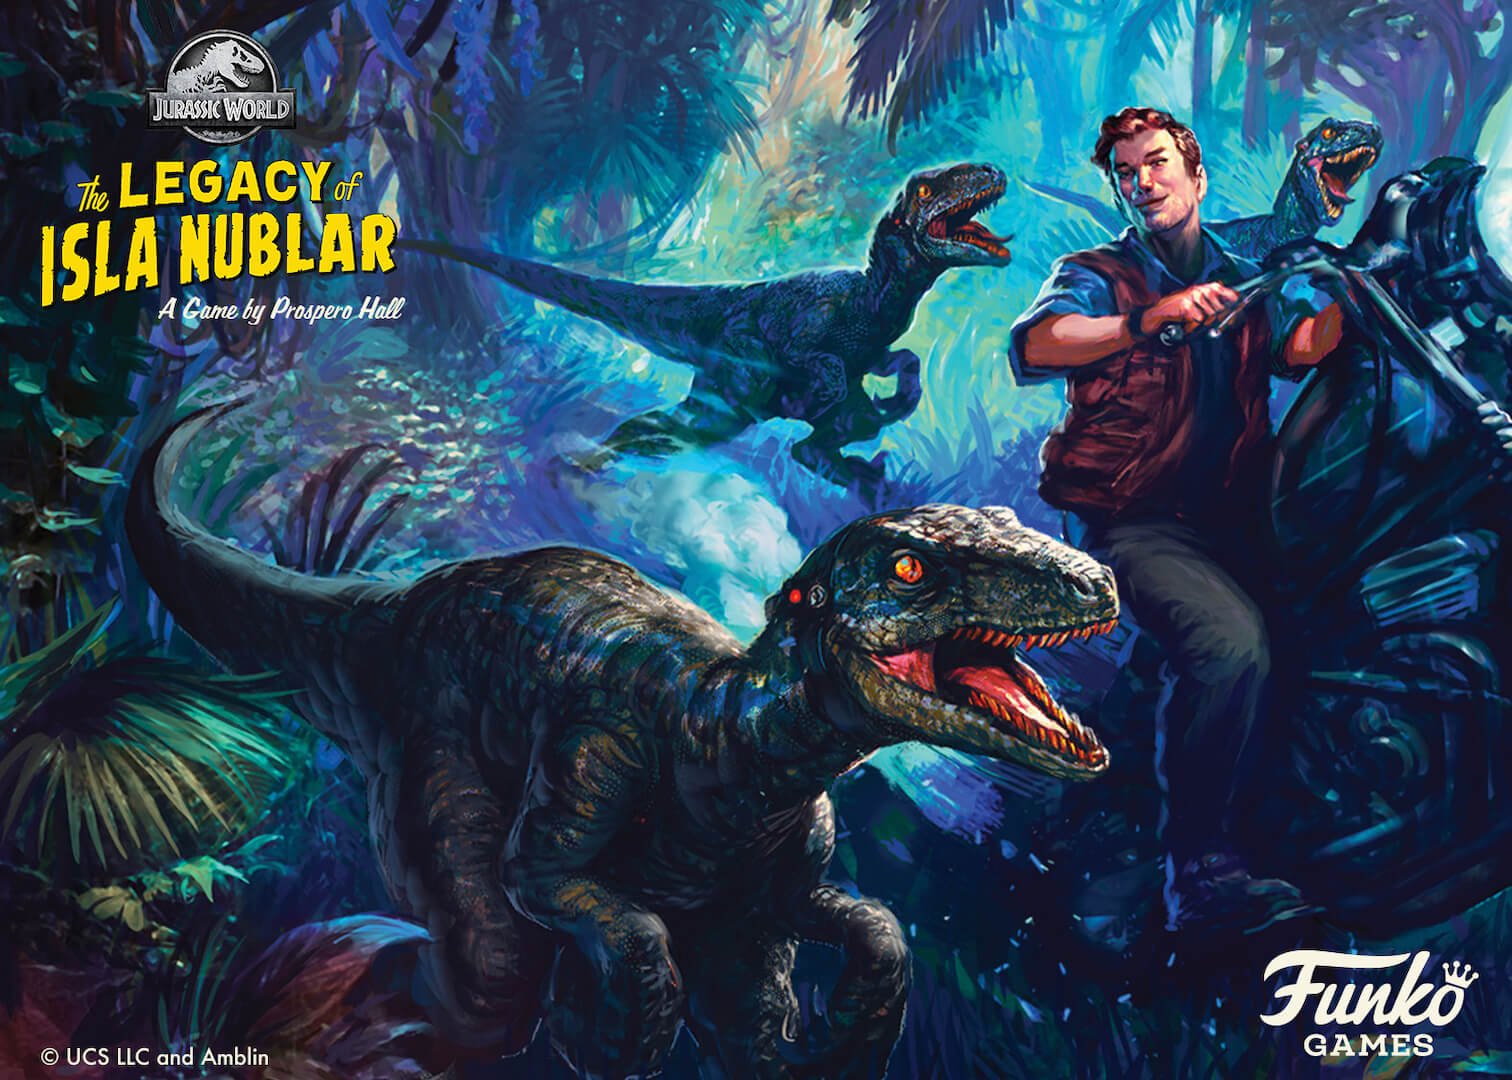 Owen Grady rides along with his Raptor pals in this exclusive preview image from Jurassic World: The Legacy of Isla Nublar